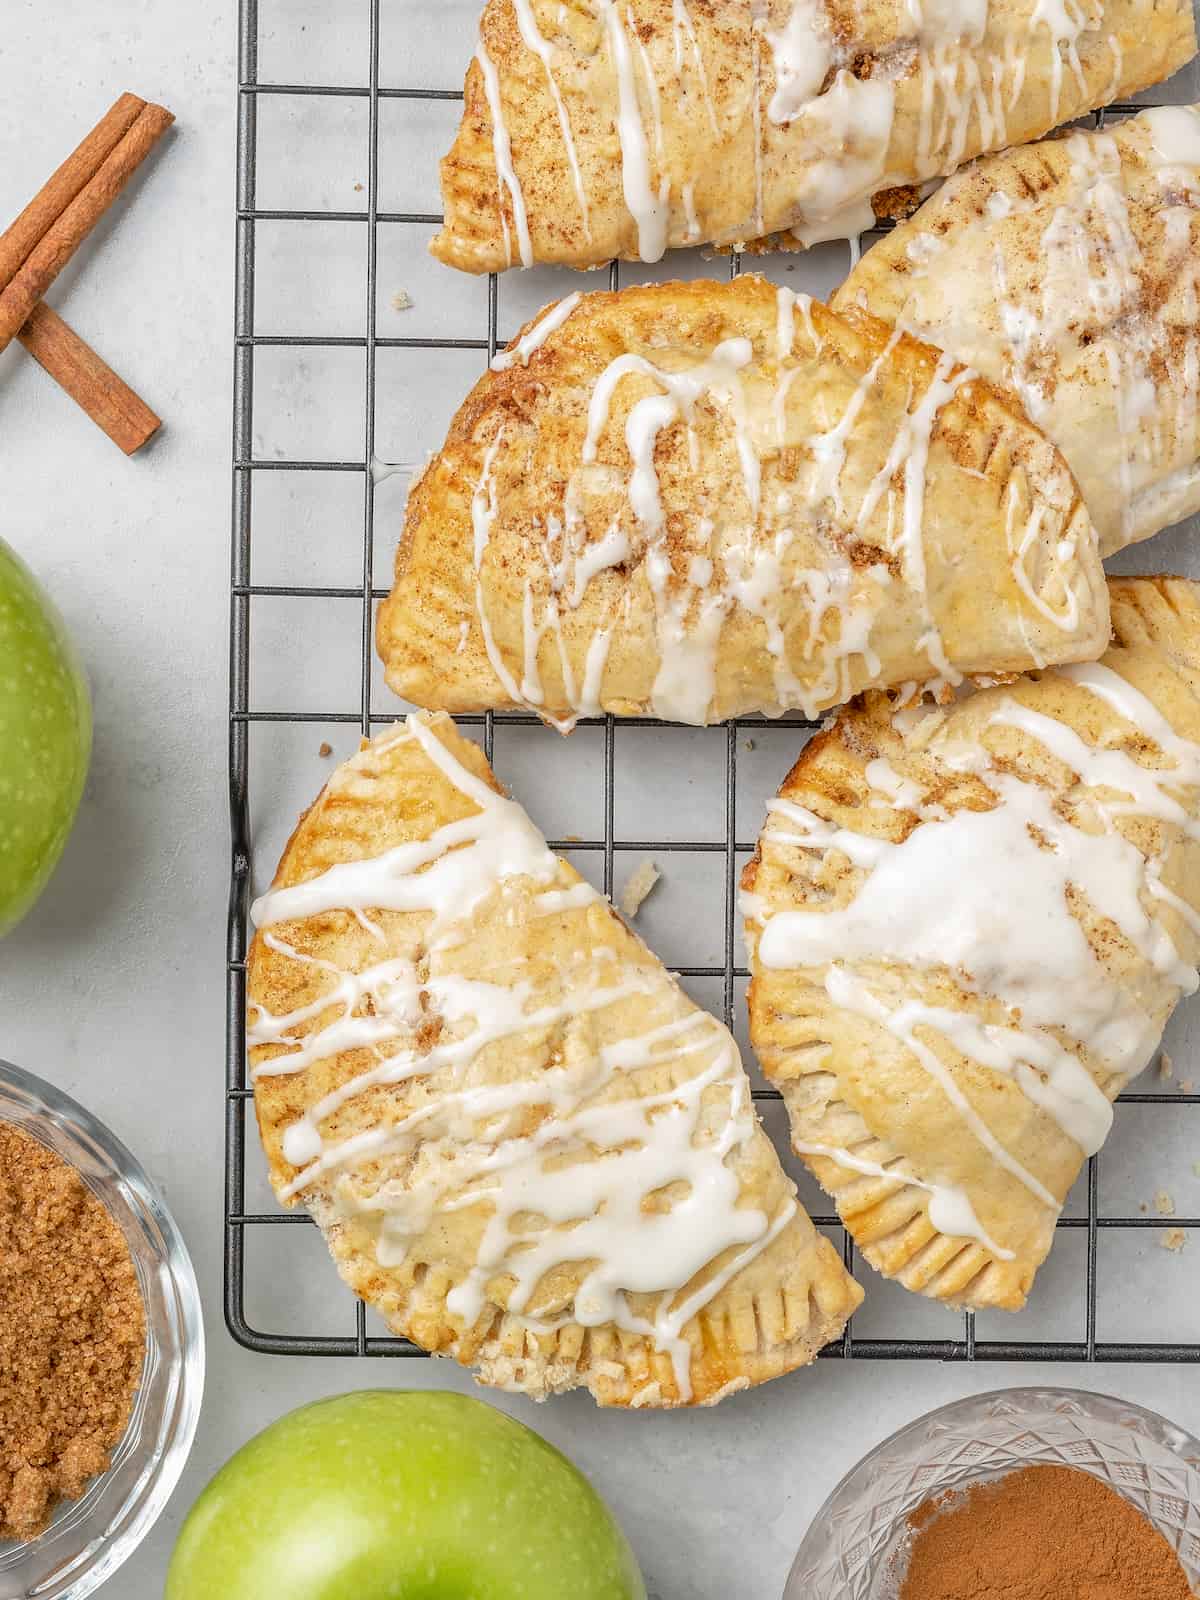 Glazed apple turnovers on a black wire rack, next to green Granny Smith apples.